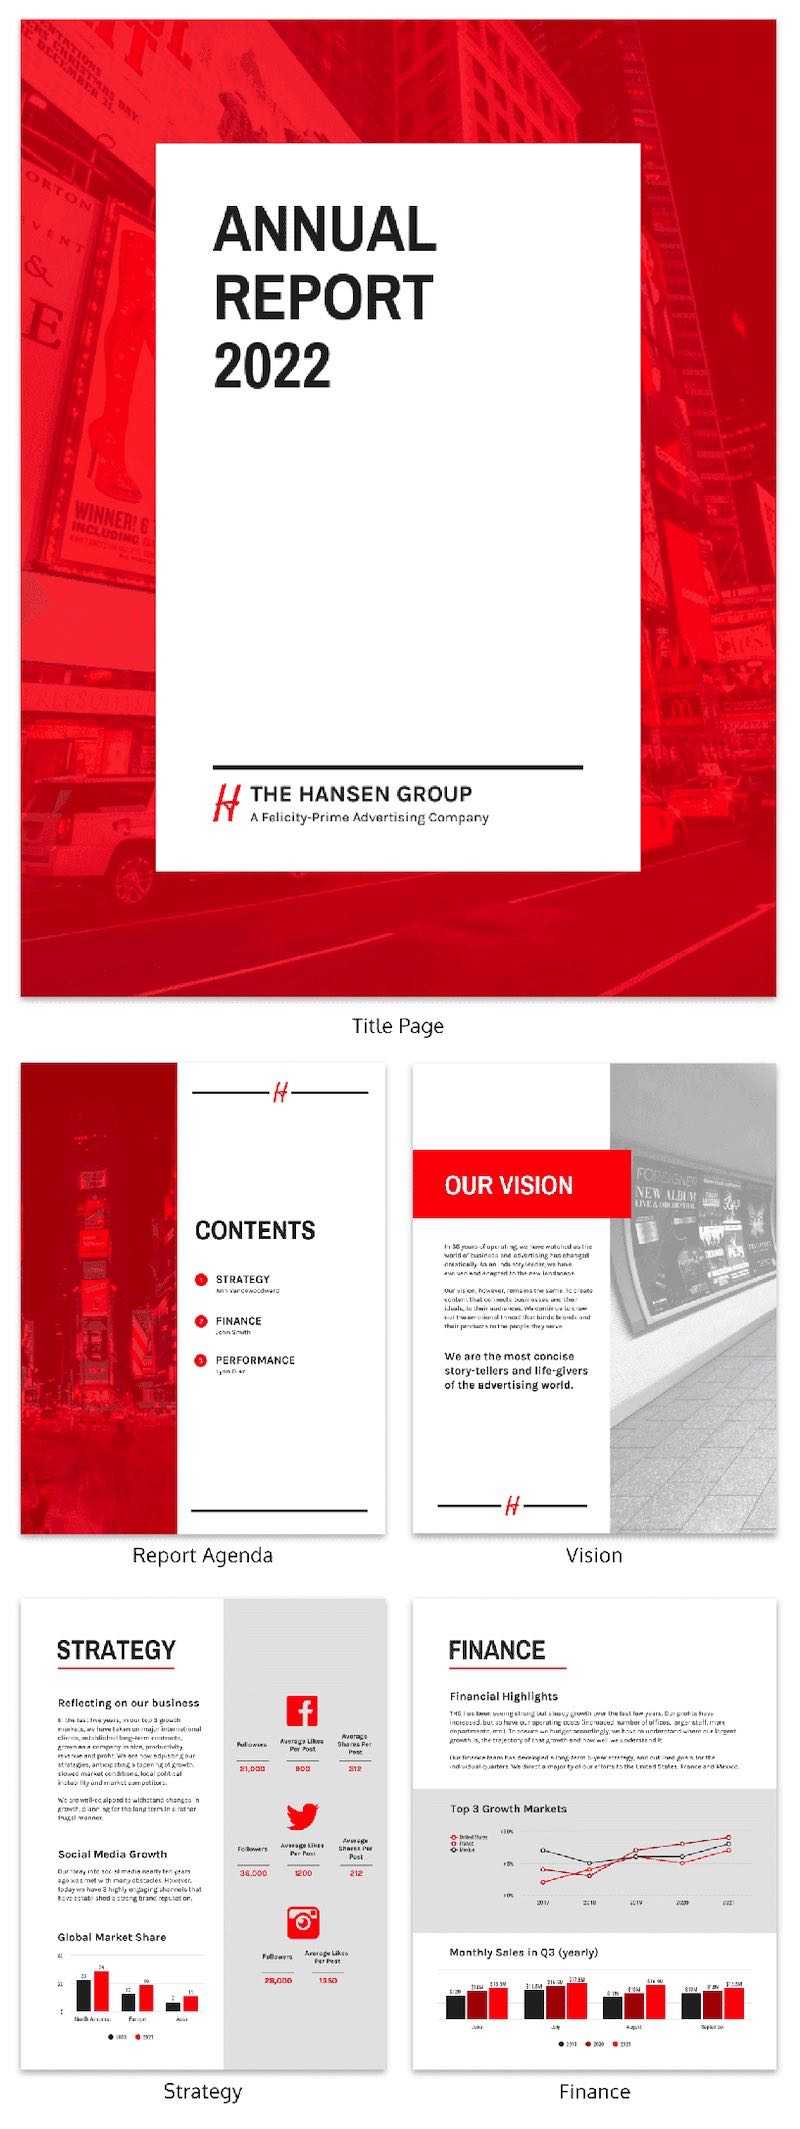 55+ Annual Report Design Templates & Inspirational Examples Intended For Summary Annual Report Template